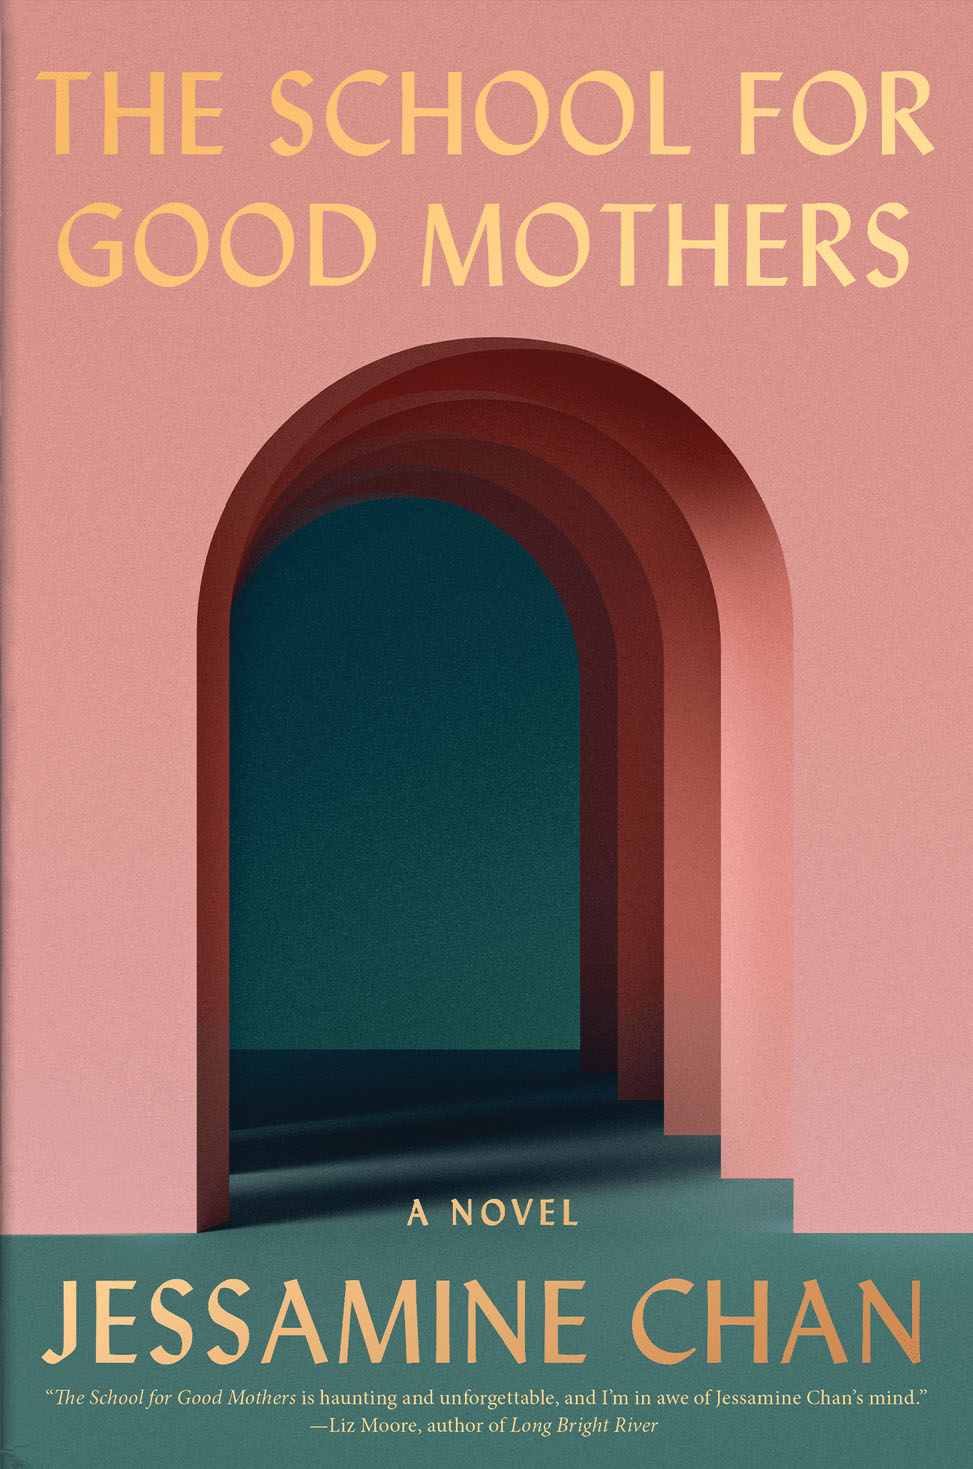 Good-Mothers